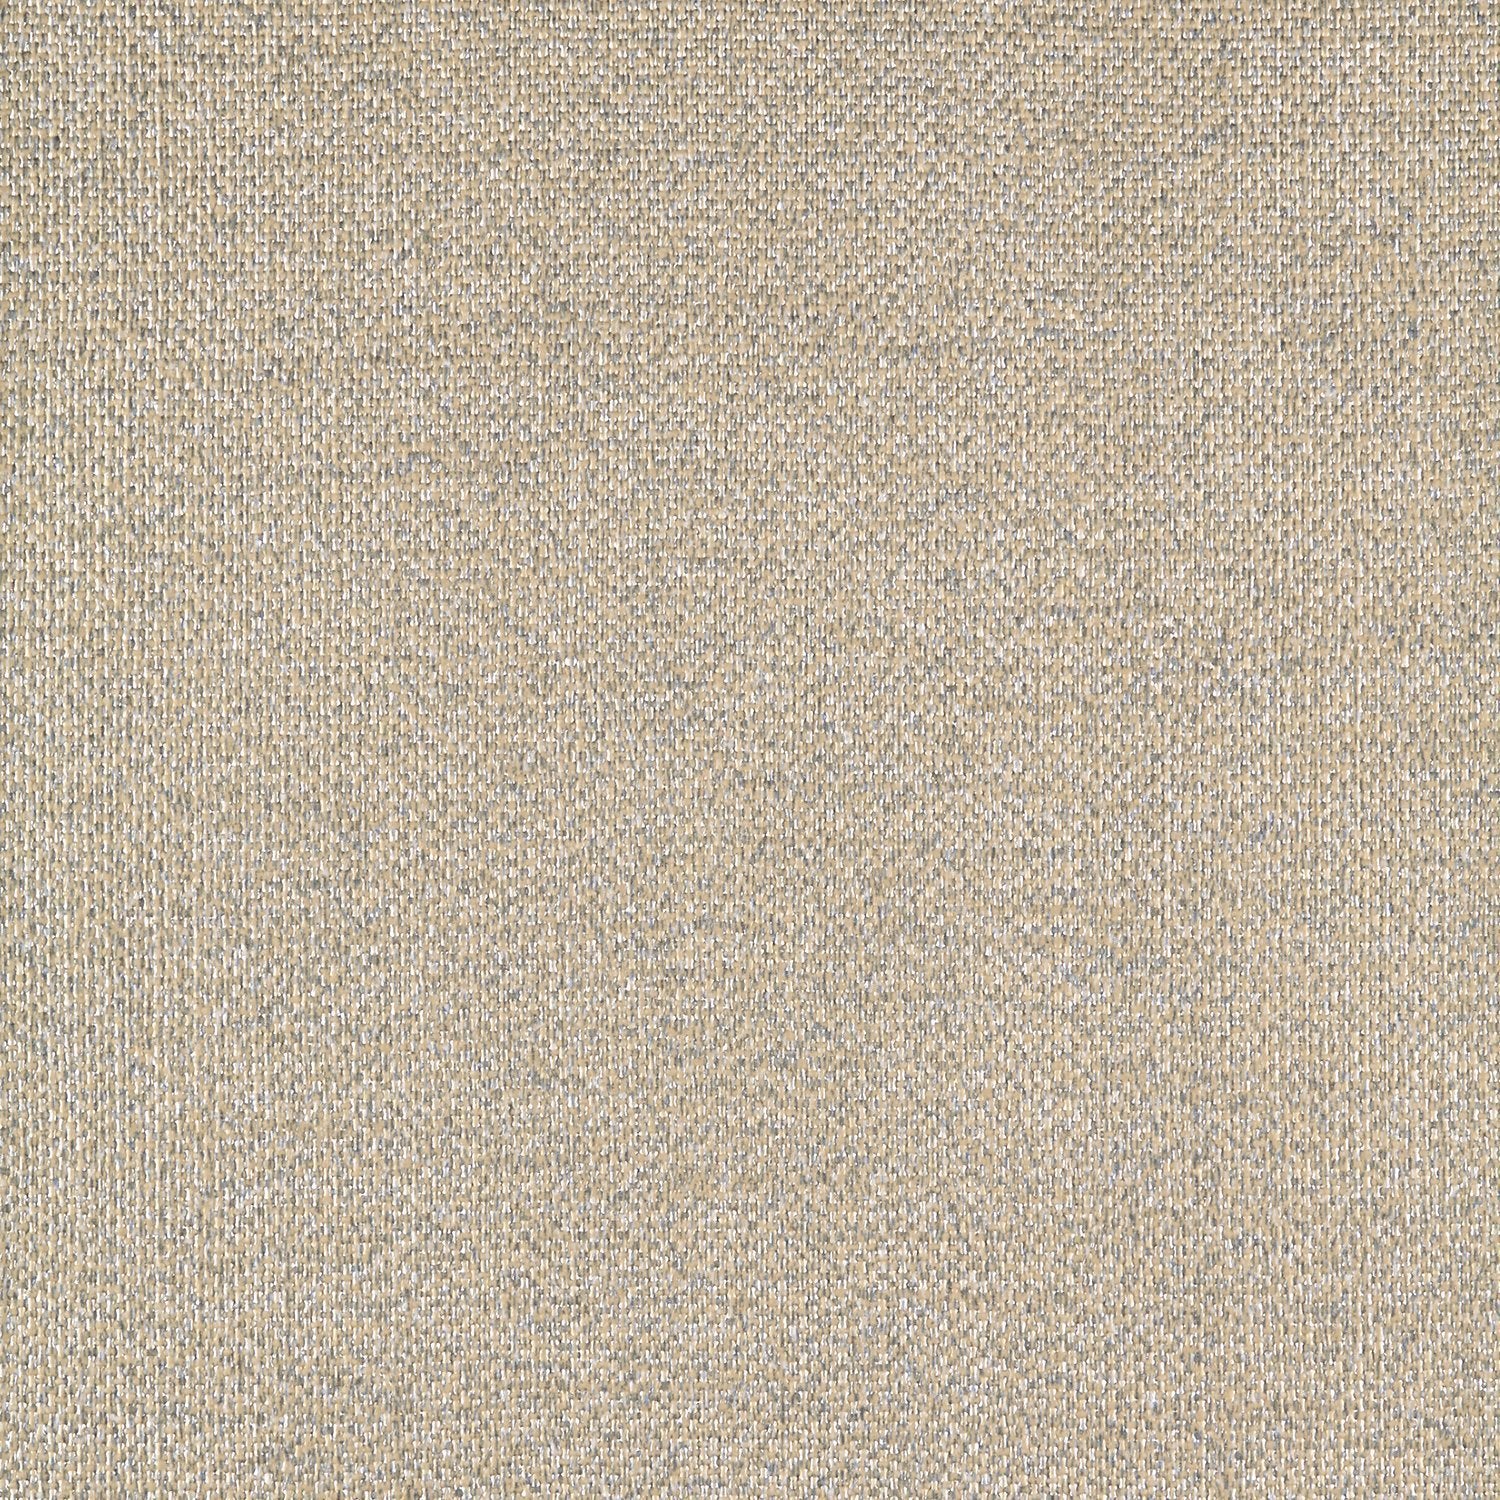 Tweed - Y46937 - Wallcovering - Vycon - Kube Contract